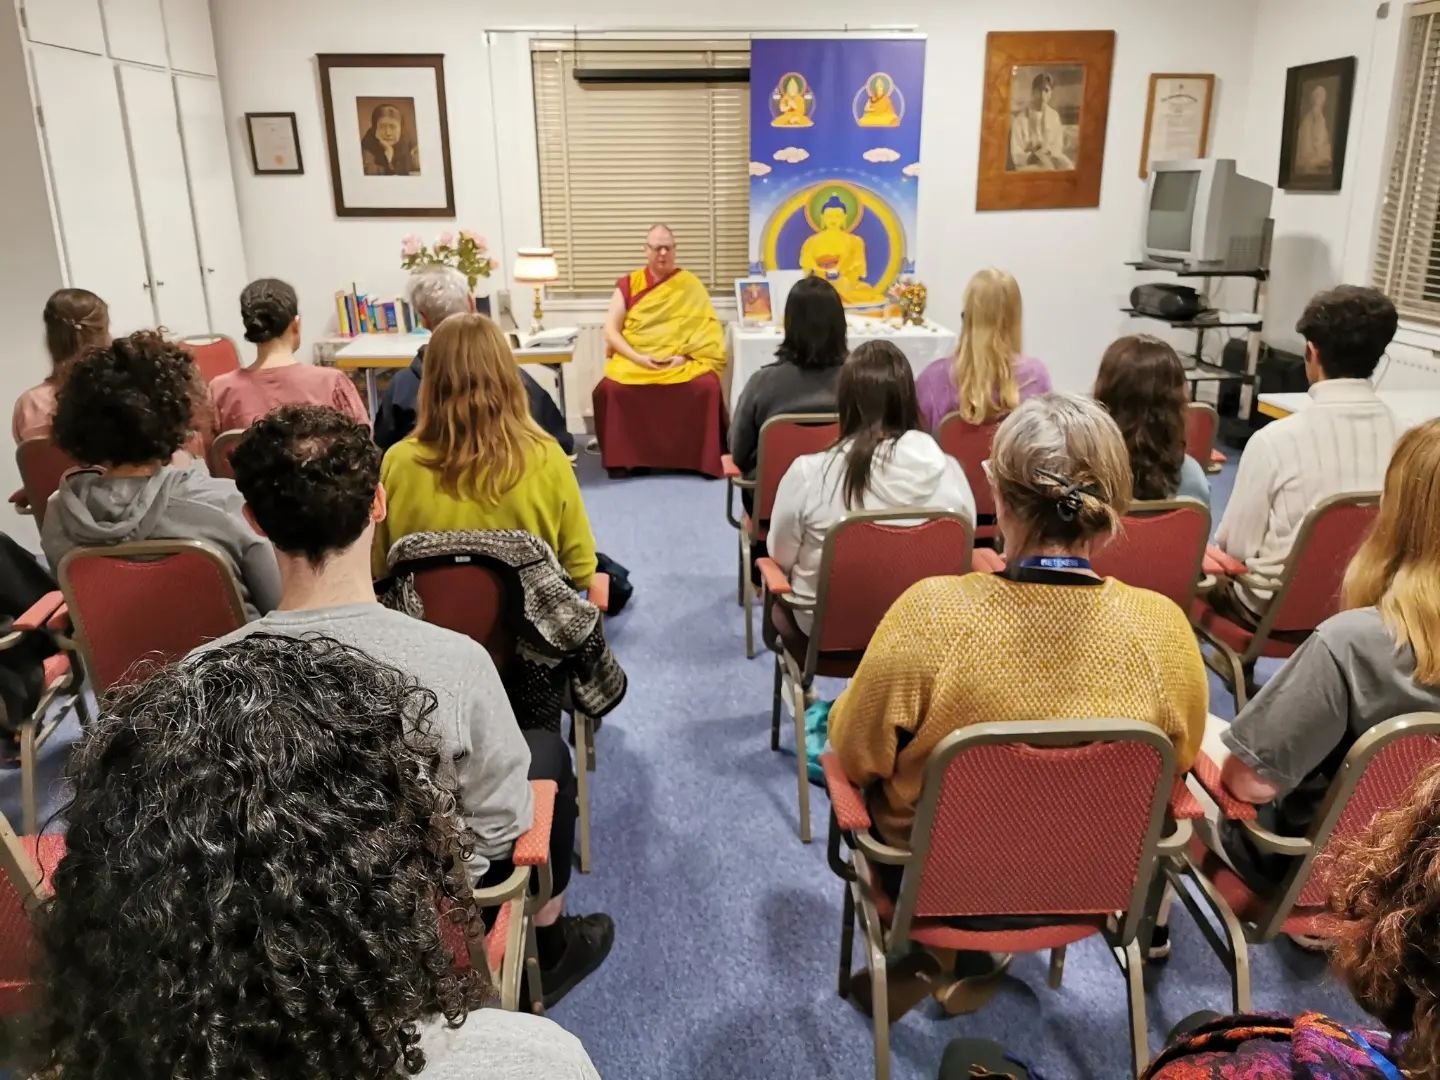 DHARMA RETURNS TO THE NETHERLANDS. Recently, KMC Oslo organized a well-attended and much-appreciated meditation weekend in Amsterdam, Netherlands. Gen Dragpa, the Resident Teacher at KMC Oslo in Norway, who is also a native Dutch speaker, led the wee